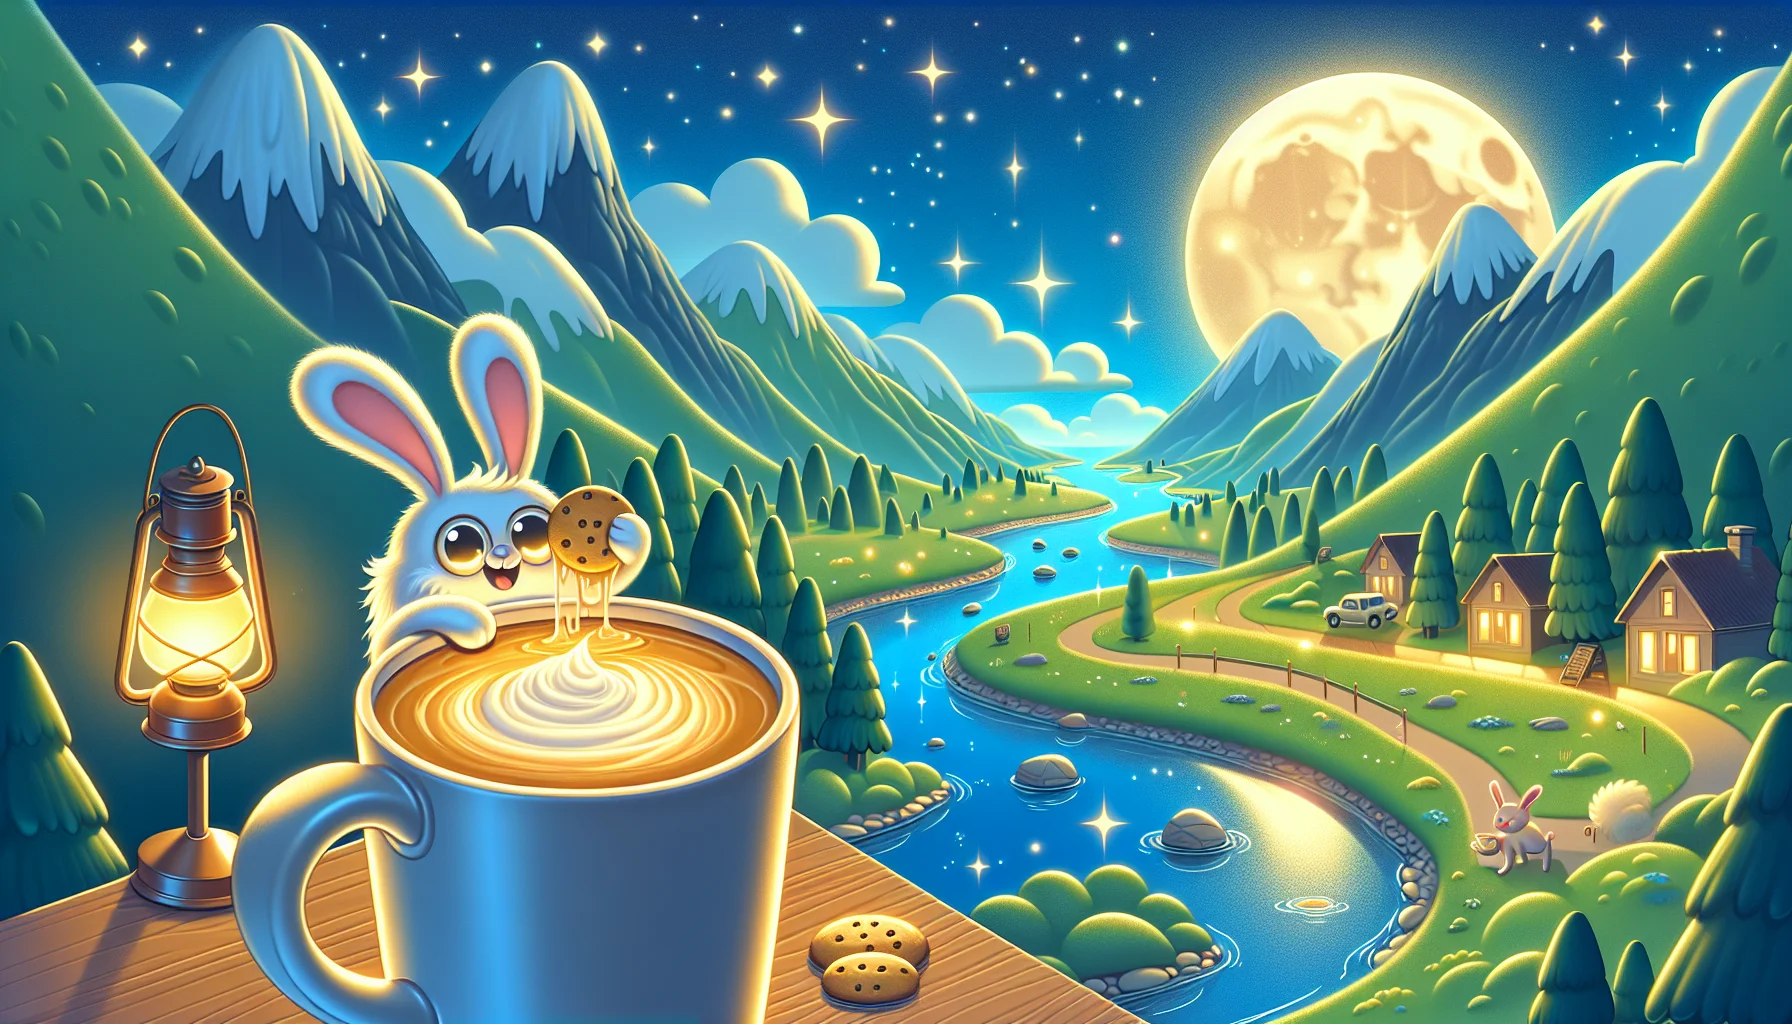 Illustrate a humorously appealing scenario set in the Dreamlight Valley. At the center of the scene, a mug of warm, frothy latte is glowing mysteriously under the shining moon, with the Dreamlight Valley as the backdrop. The valley is bathed in soft moonlight revealing its lush greenery, sparkling river and the gentle silhouette of distant mountains. Nearby, a cheeky rabbit in a cartoonish style appears to dunk a cookie into the latte, giving a thumbs-up sign with its other paw towards the viewers, hence inviting them to enjoy the Dreamlight Valley Latte, under the enchanting night.